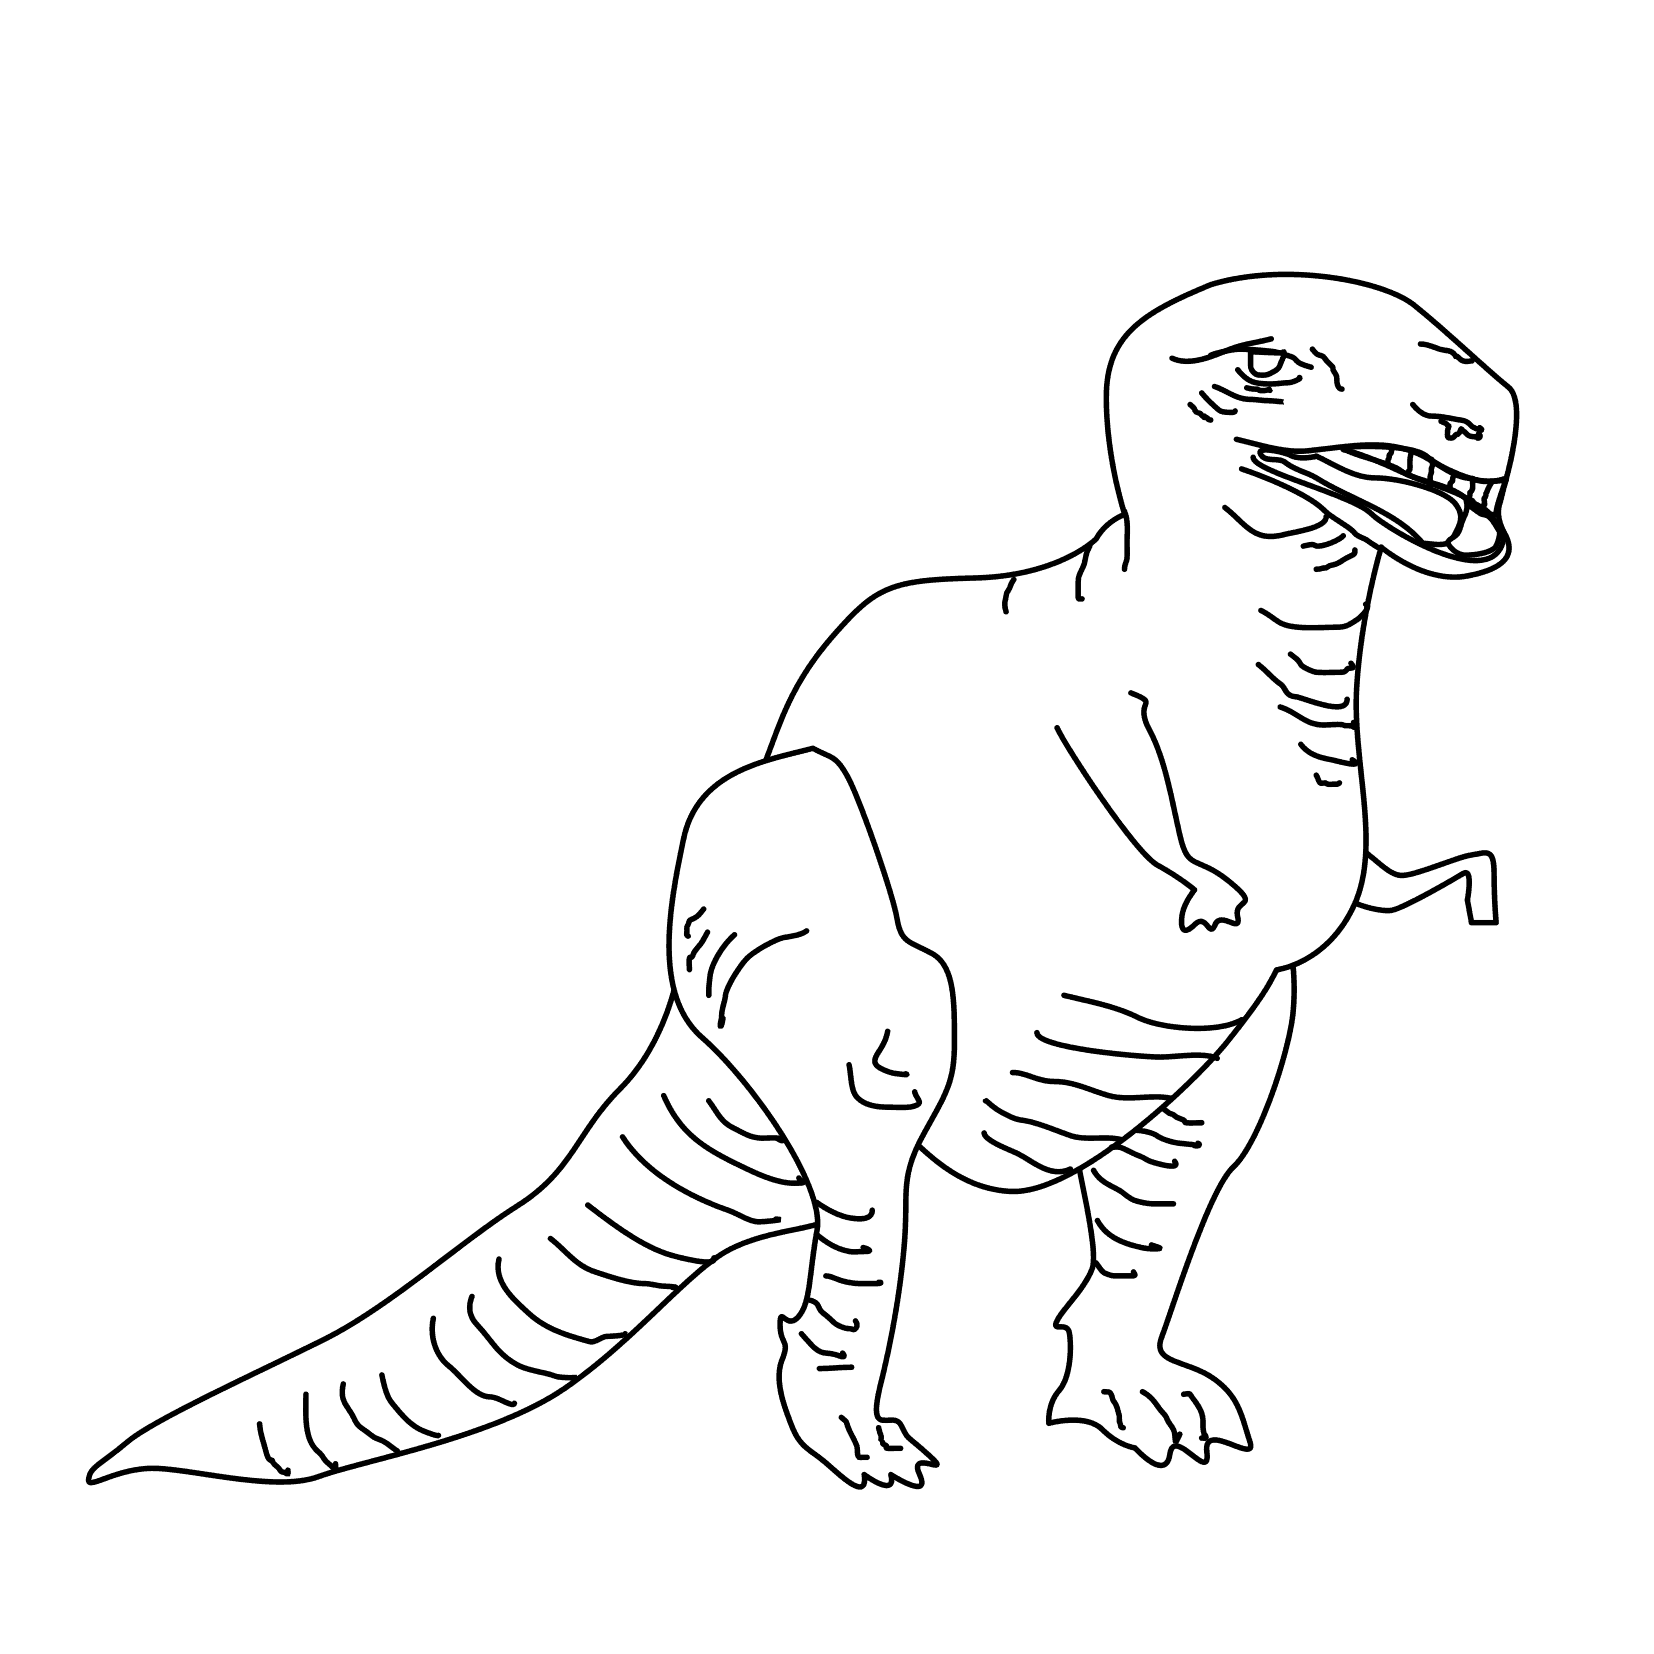 print dinosaur pictures free printable dinosaur coloring pages for kids pictures dinosaur print 